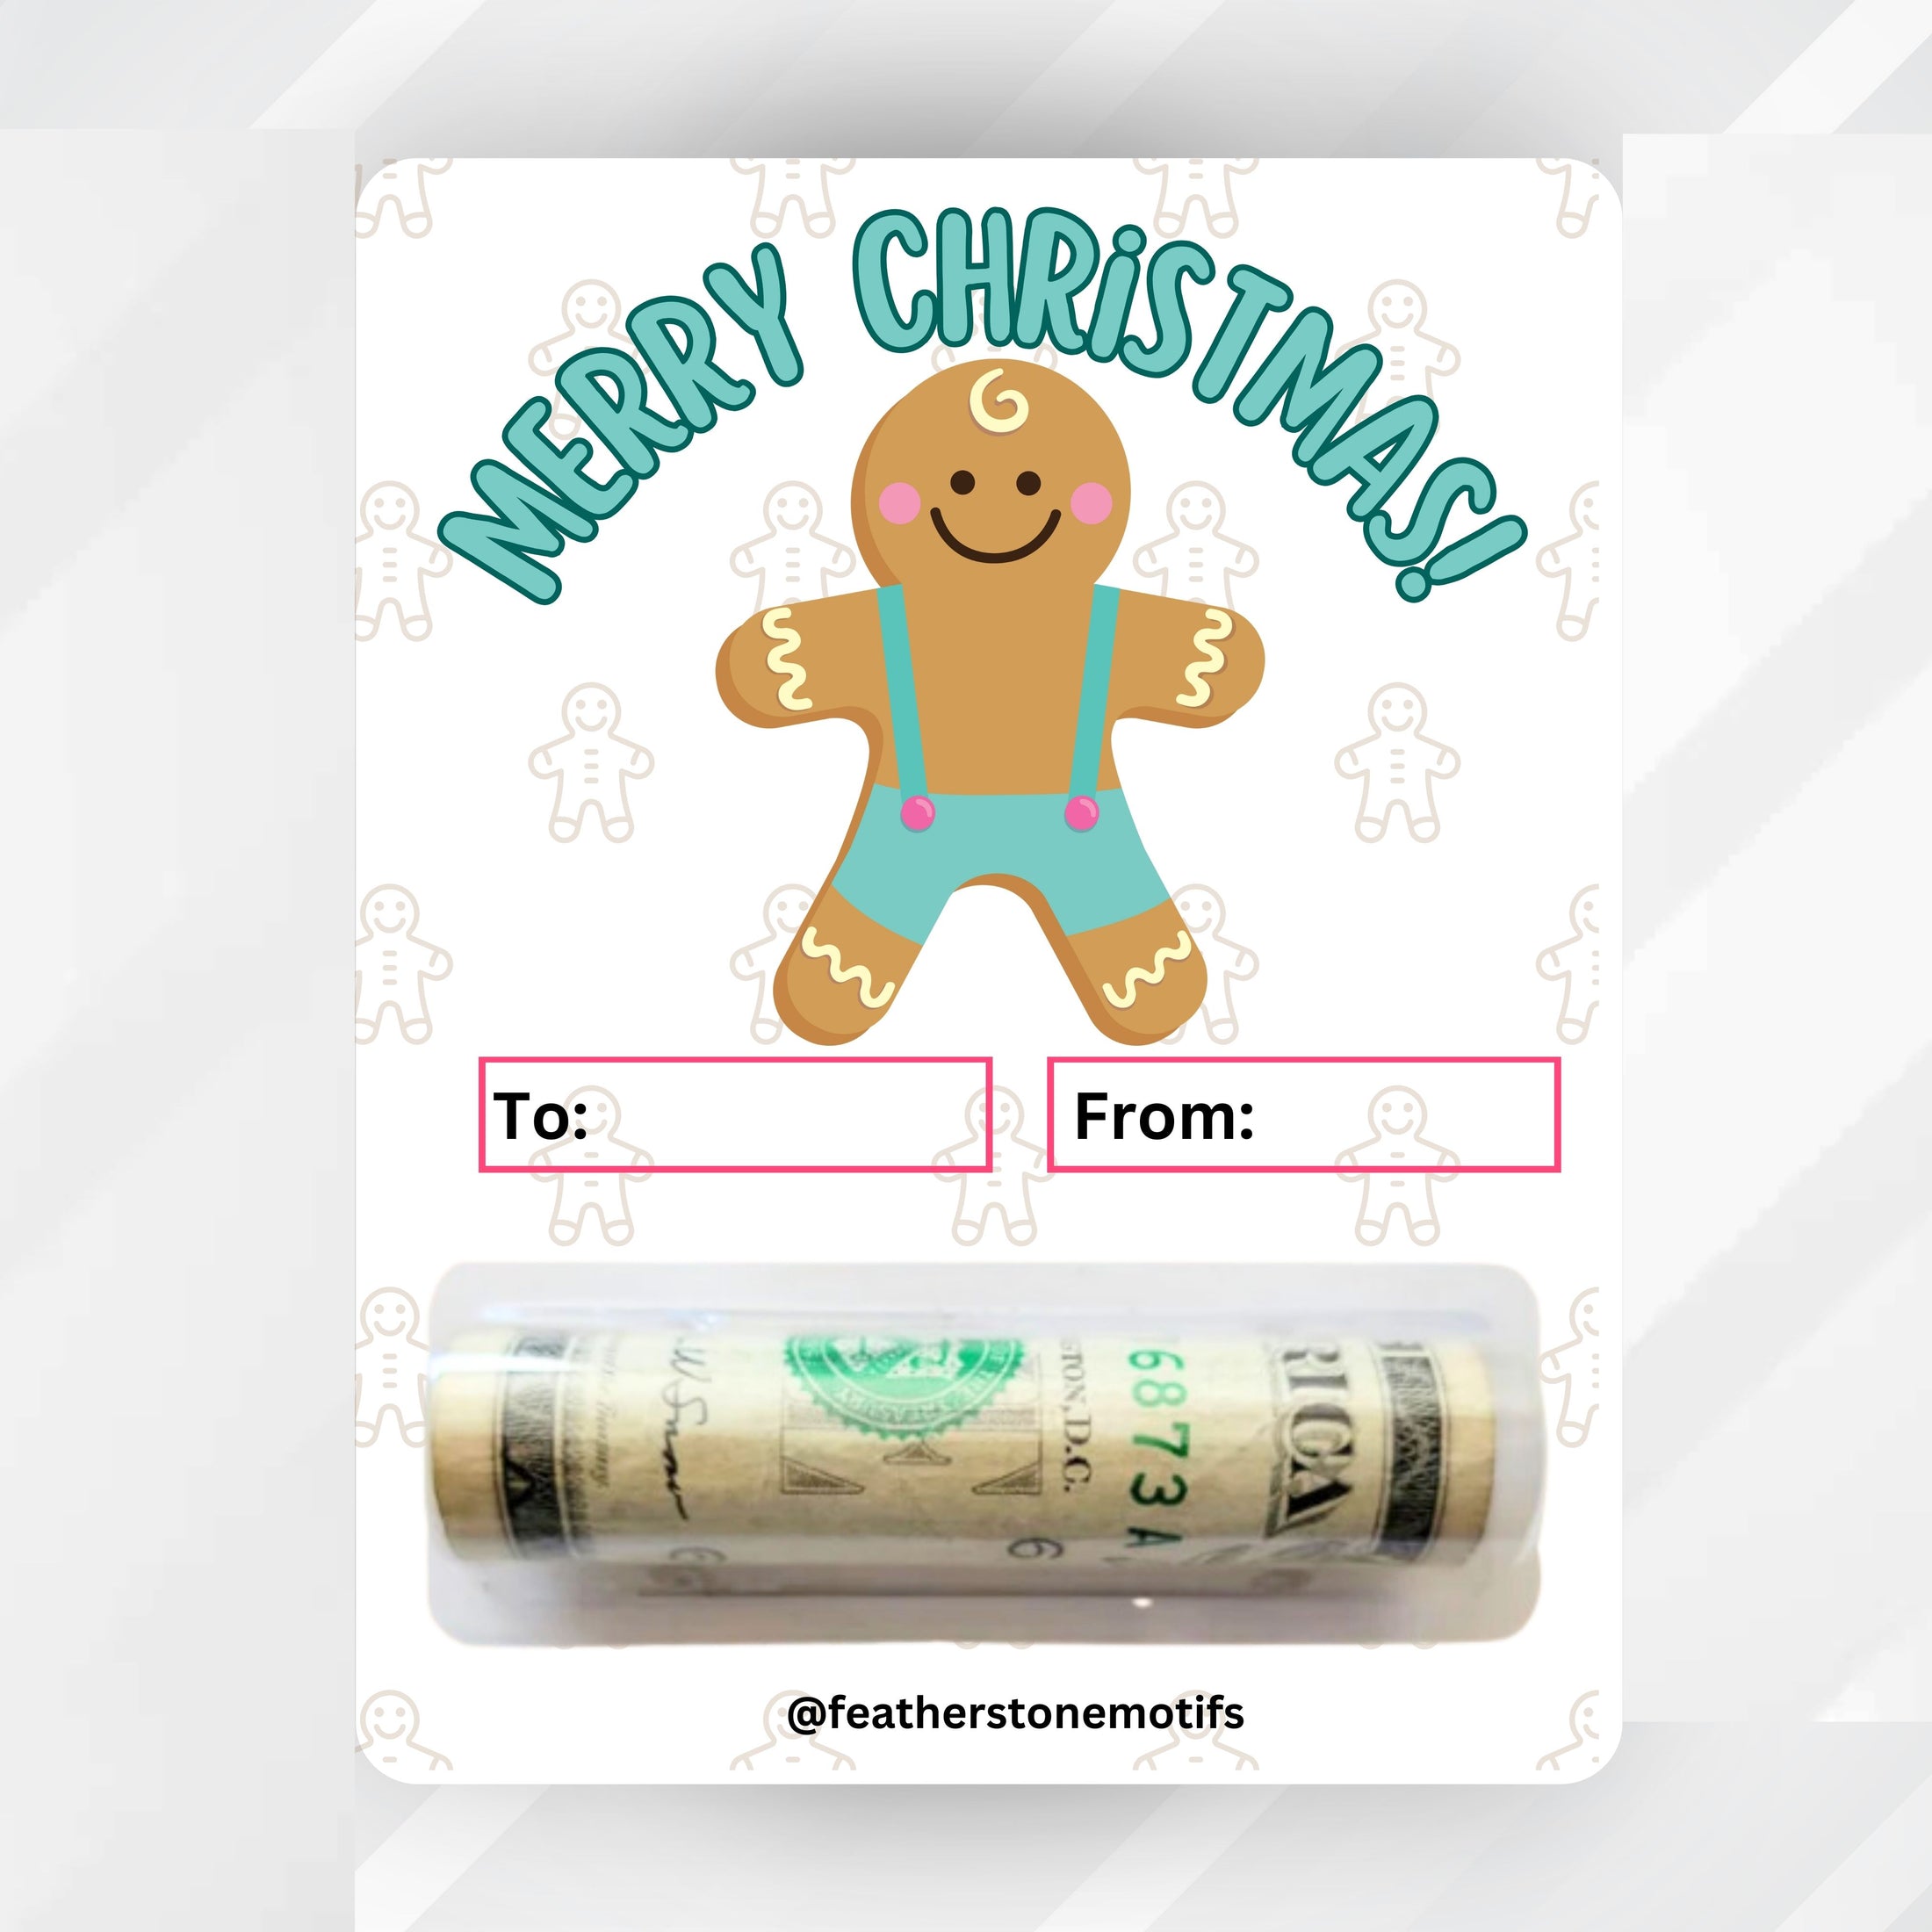 This image shows the money tube attached to the Blue Gingerbread Man money card.